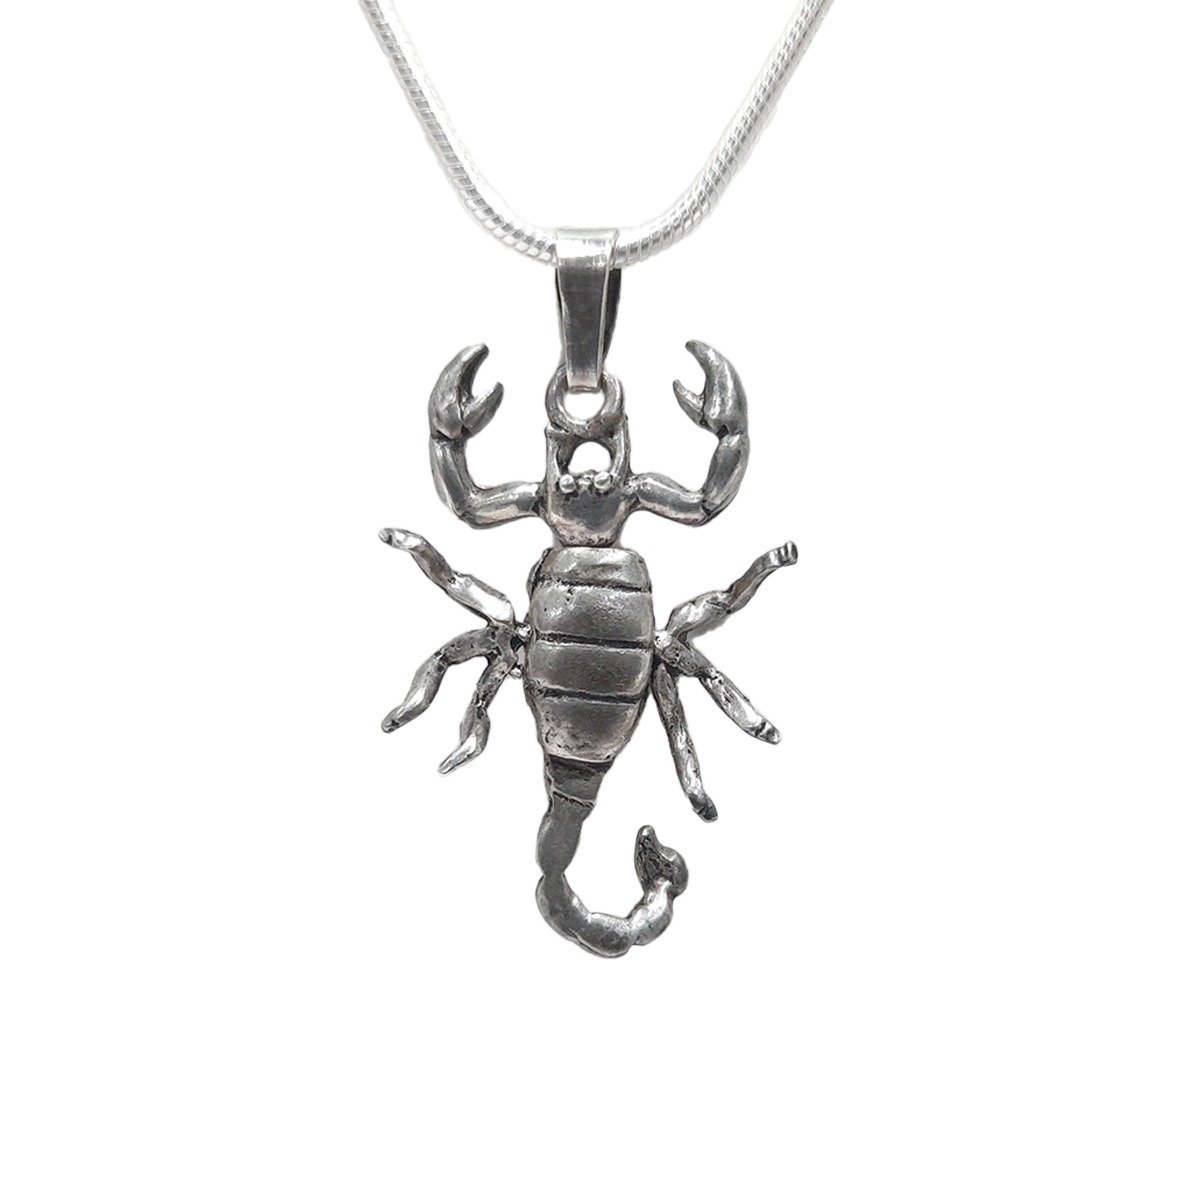 SCORPION PENDANT FOR THICK MENS CHAIN